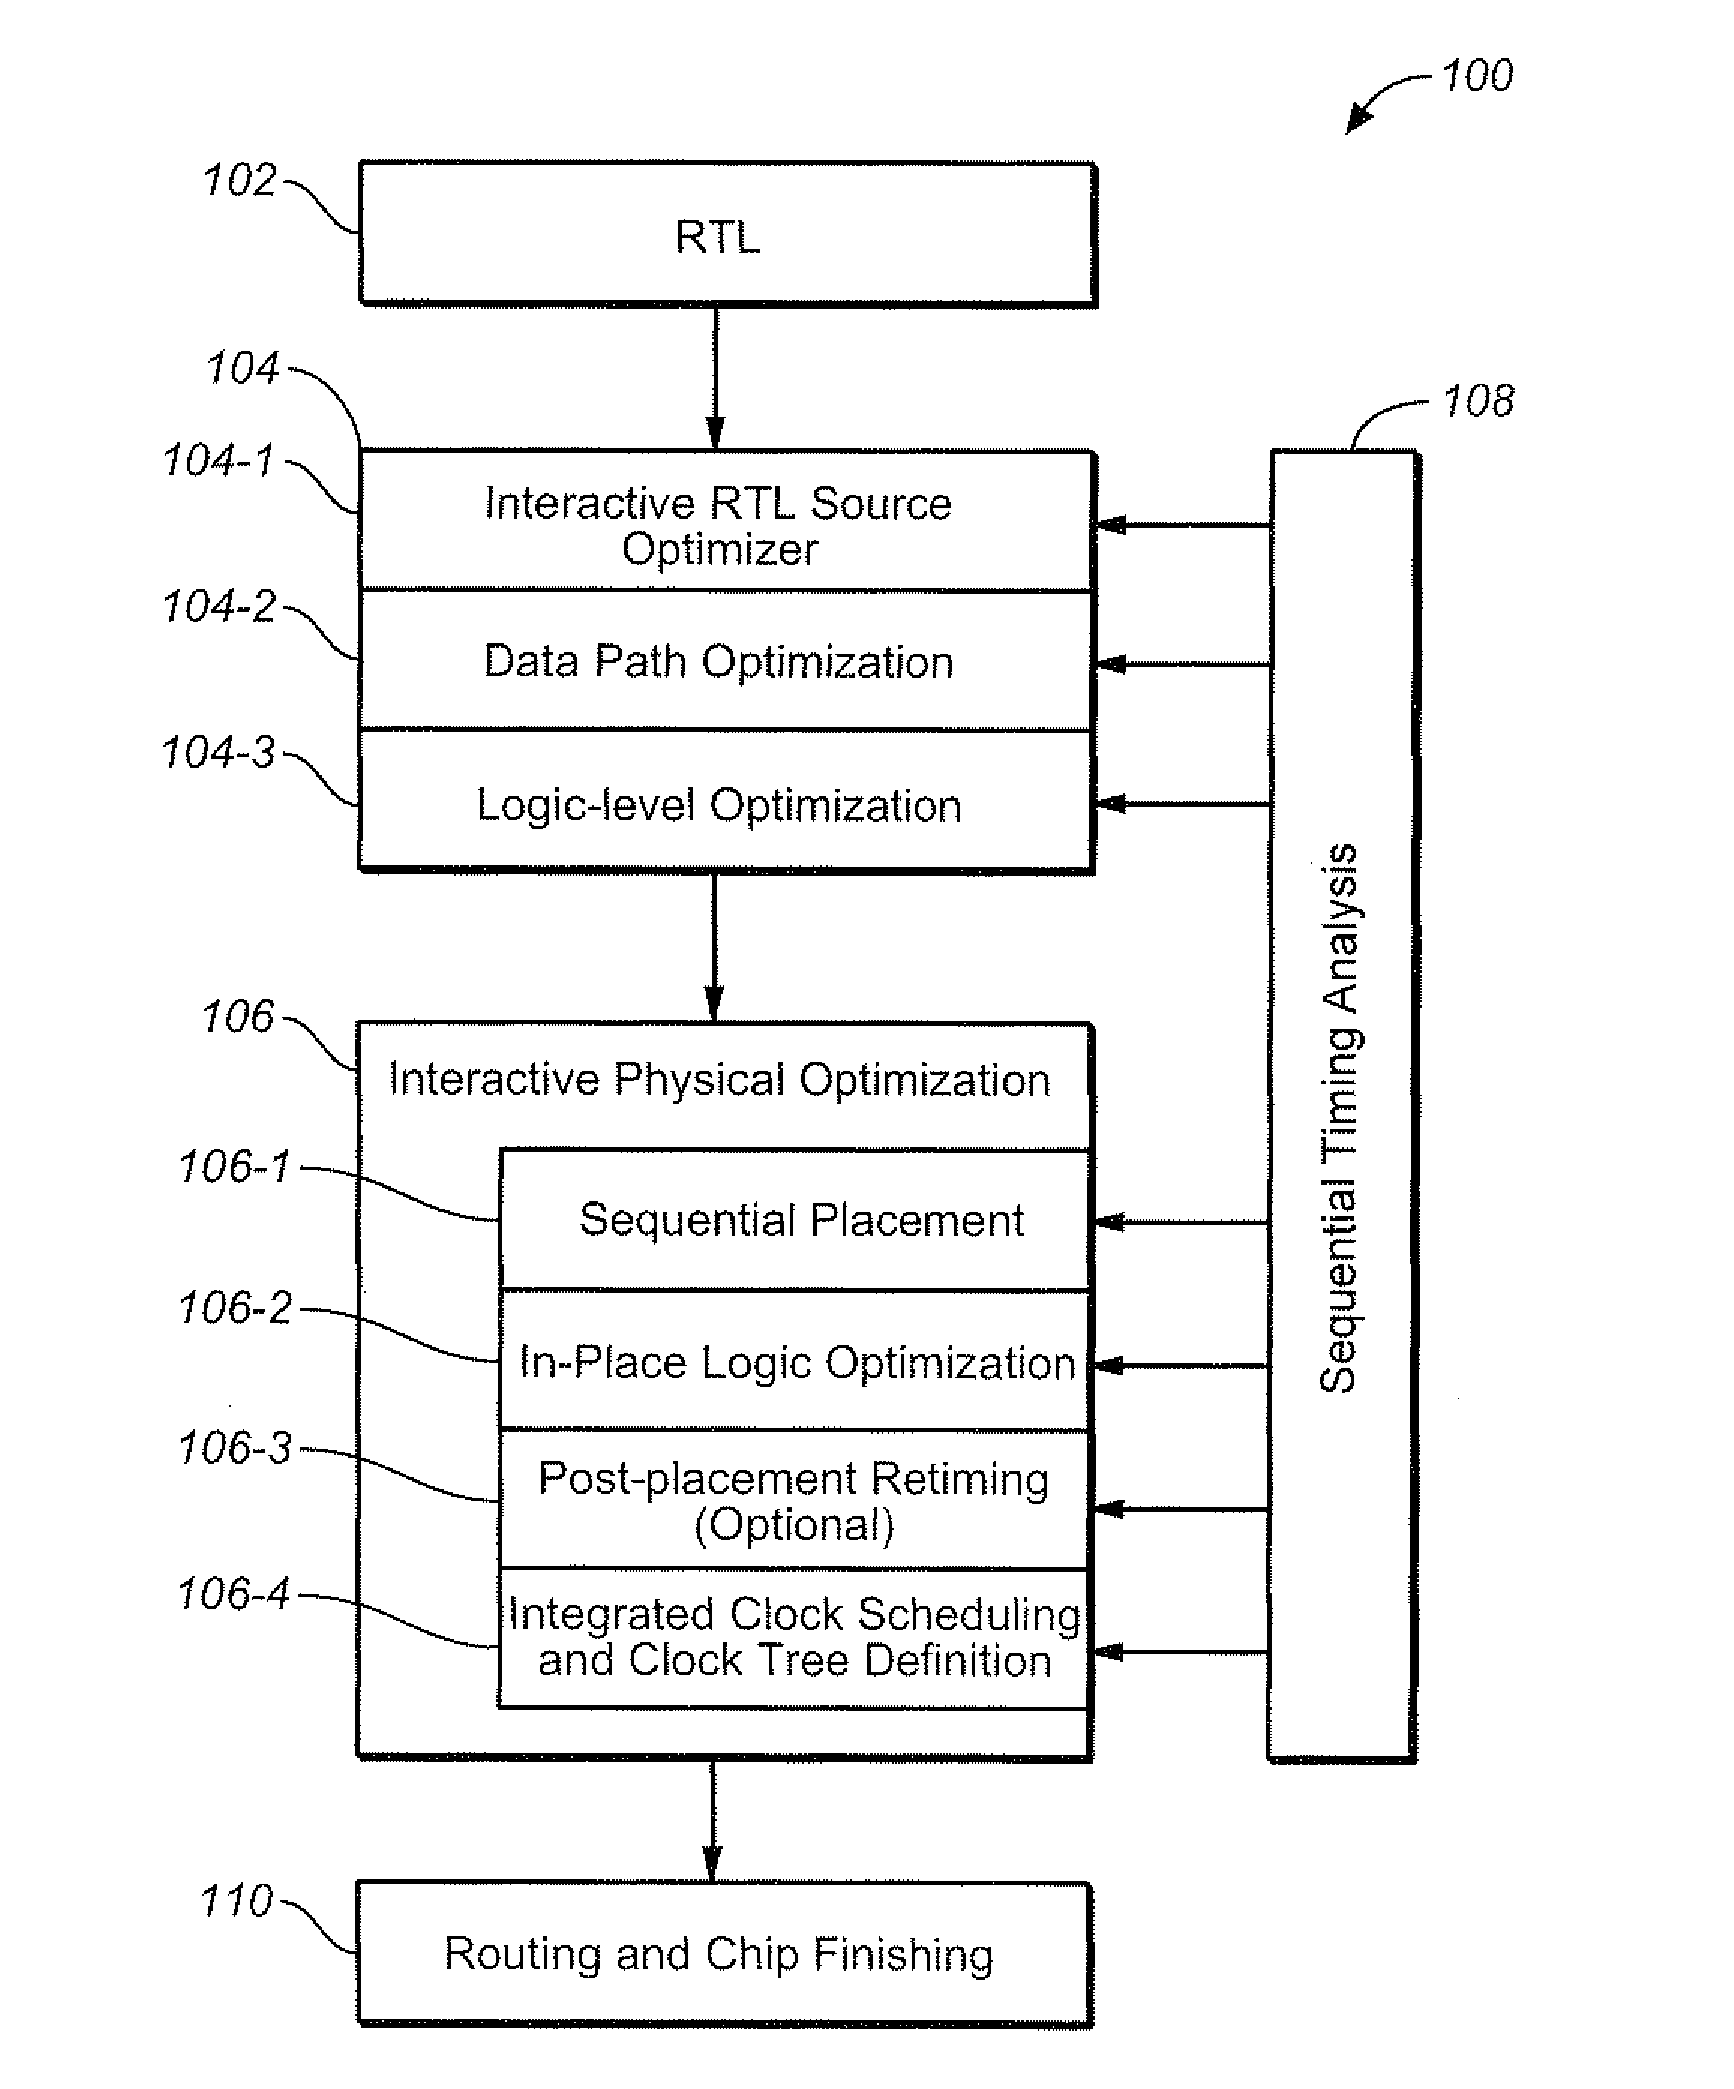 Optimizing integrated circuit design through use of sequential timing information